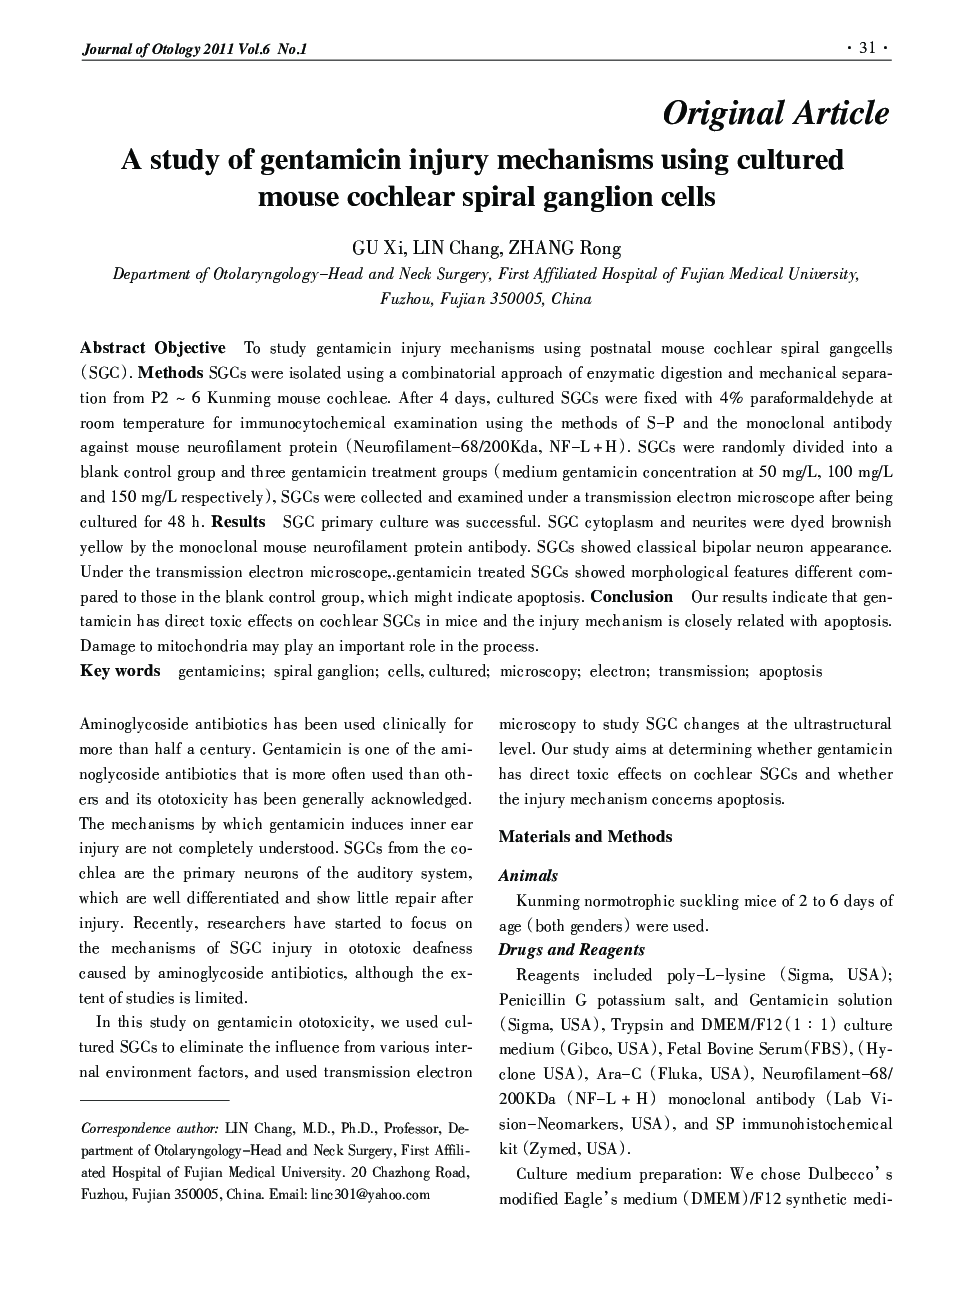 A study of gentamicin injury mechanisms using cultured mouse cochlear spiral ganglion cells